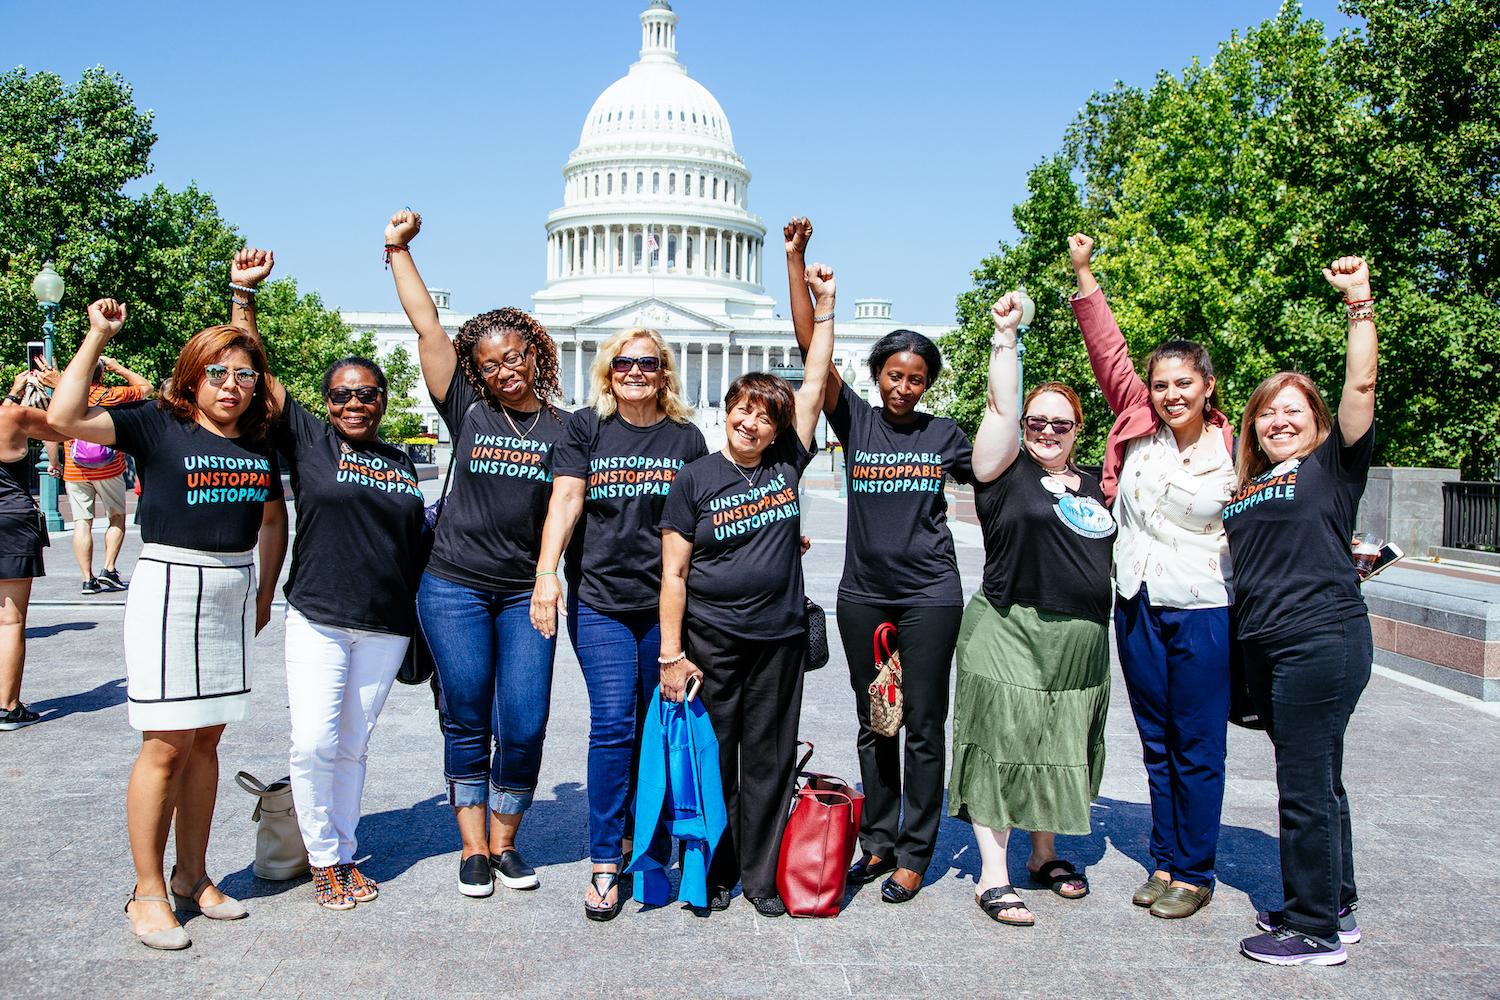 care workers and domestic workers visit Washington